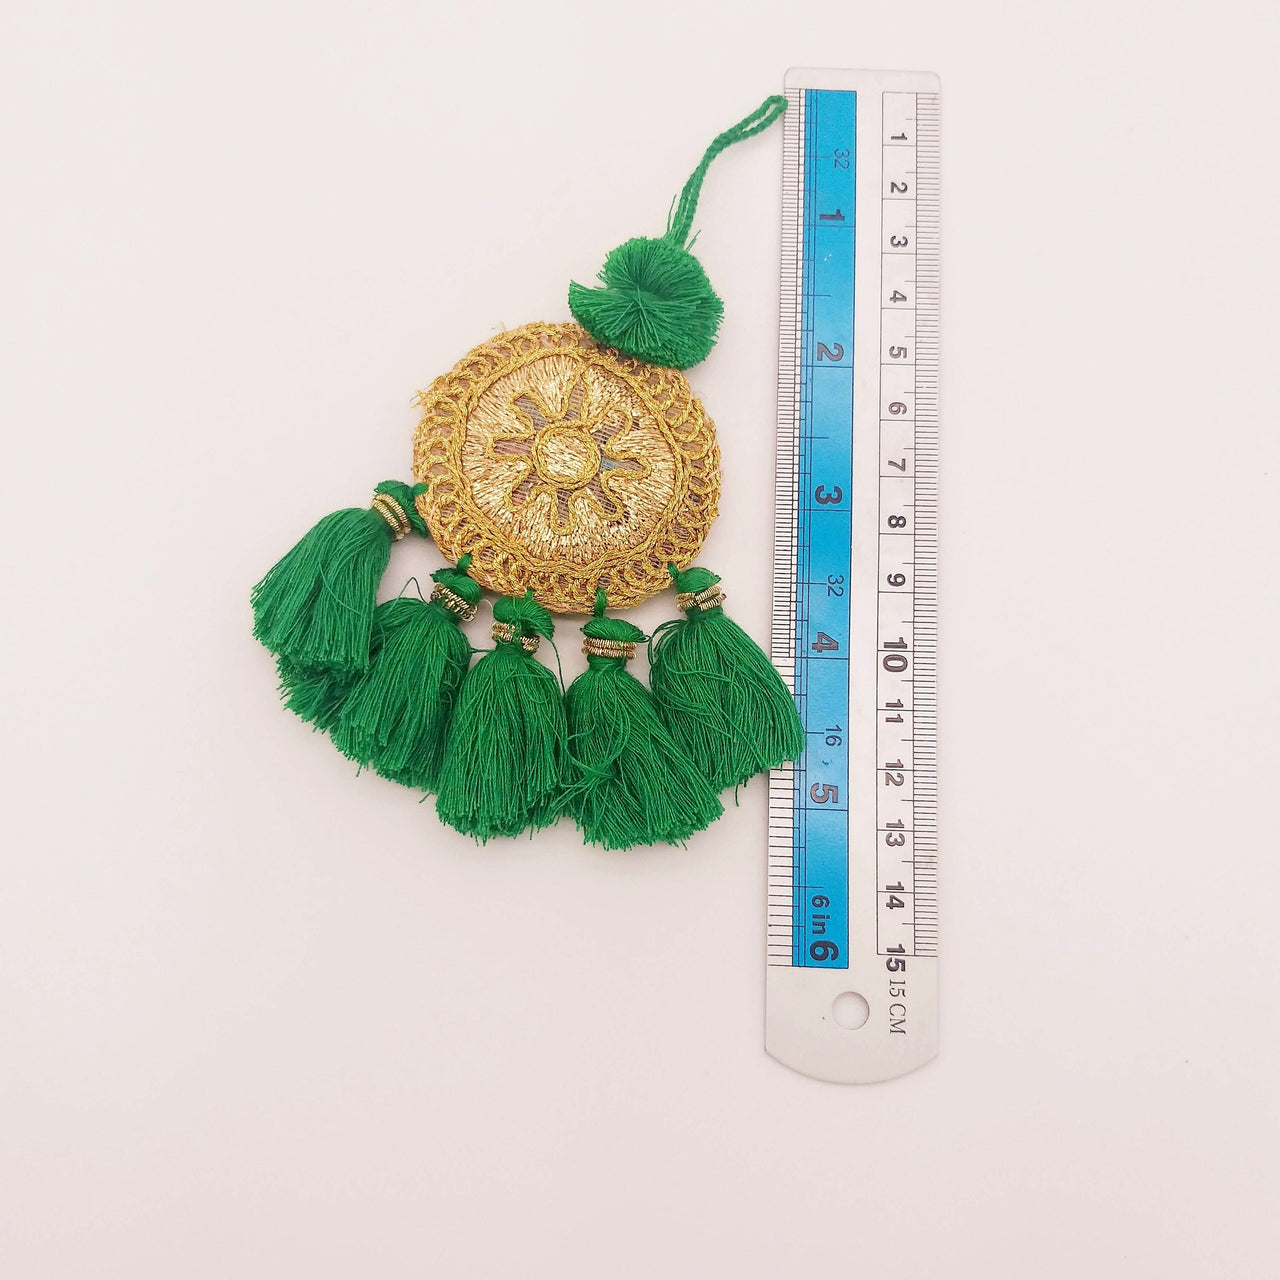 Set of 2 Embroidered Tassels, Green and Gold Tassels, Indian Tassels